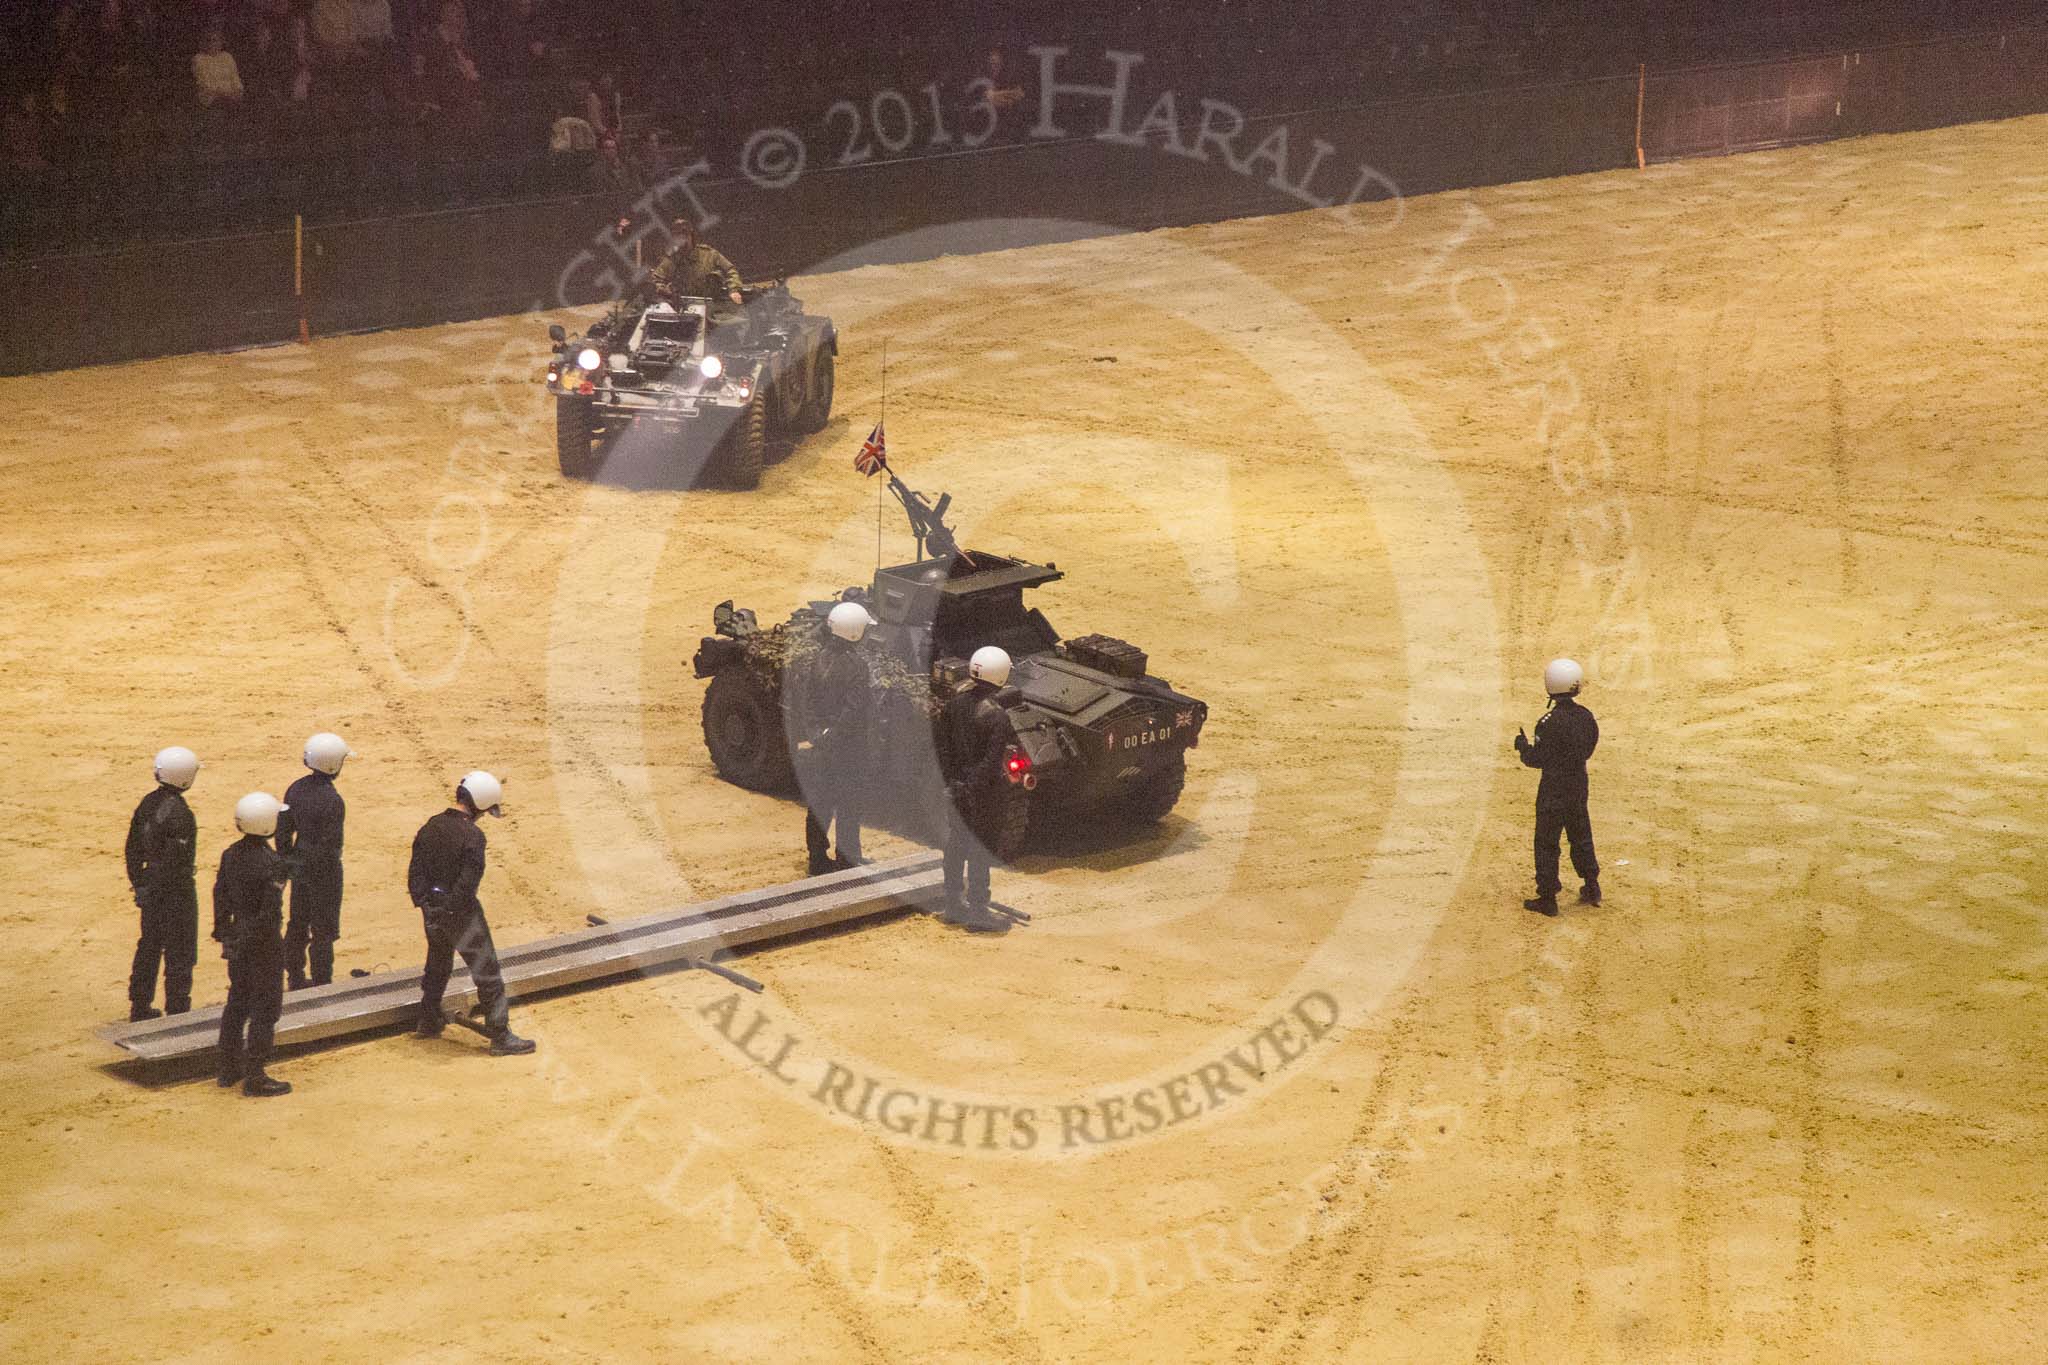 British Military Tournament 2013.
Earls Court,
London SW5,

United Kingdom,
on 06 December 2013 at 15:16, image #161